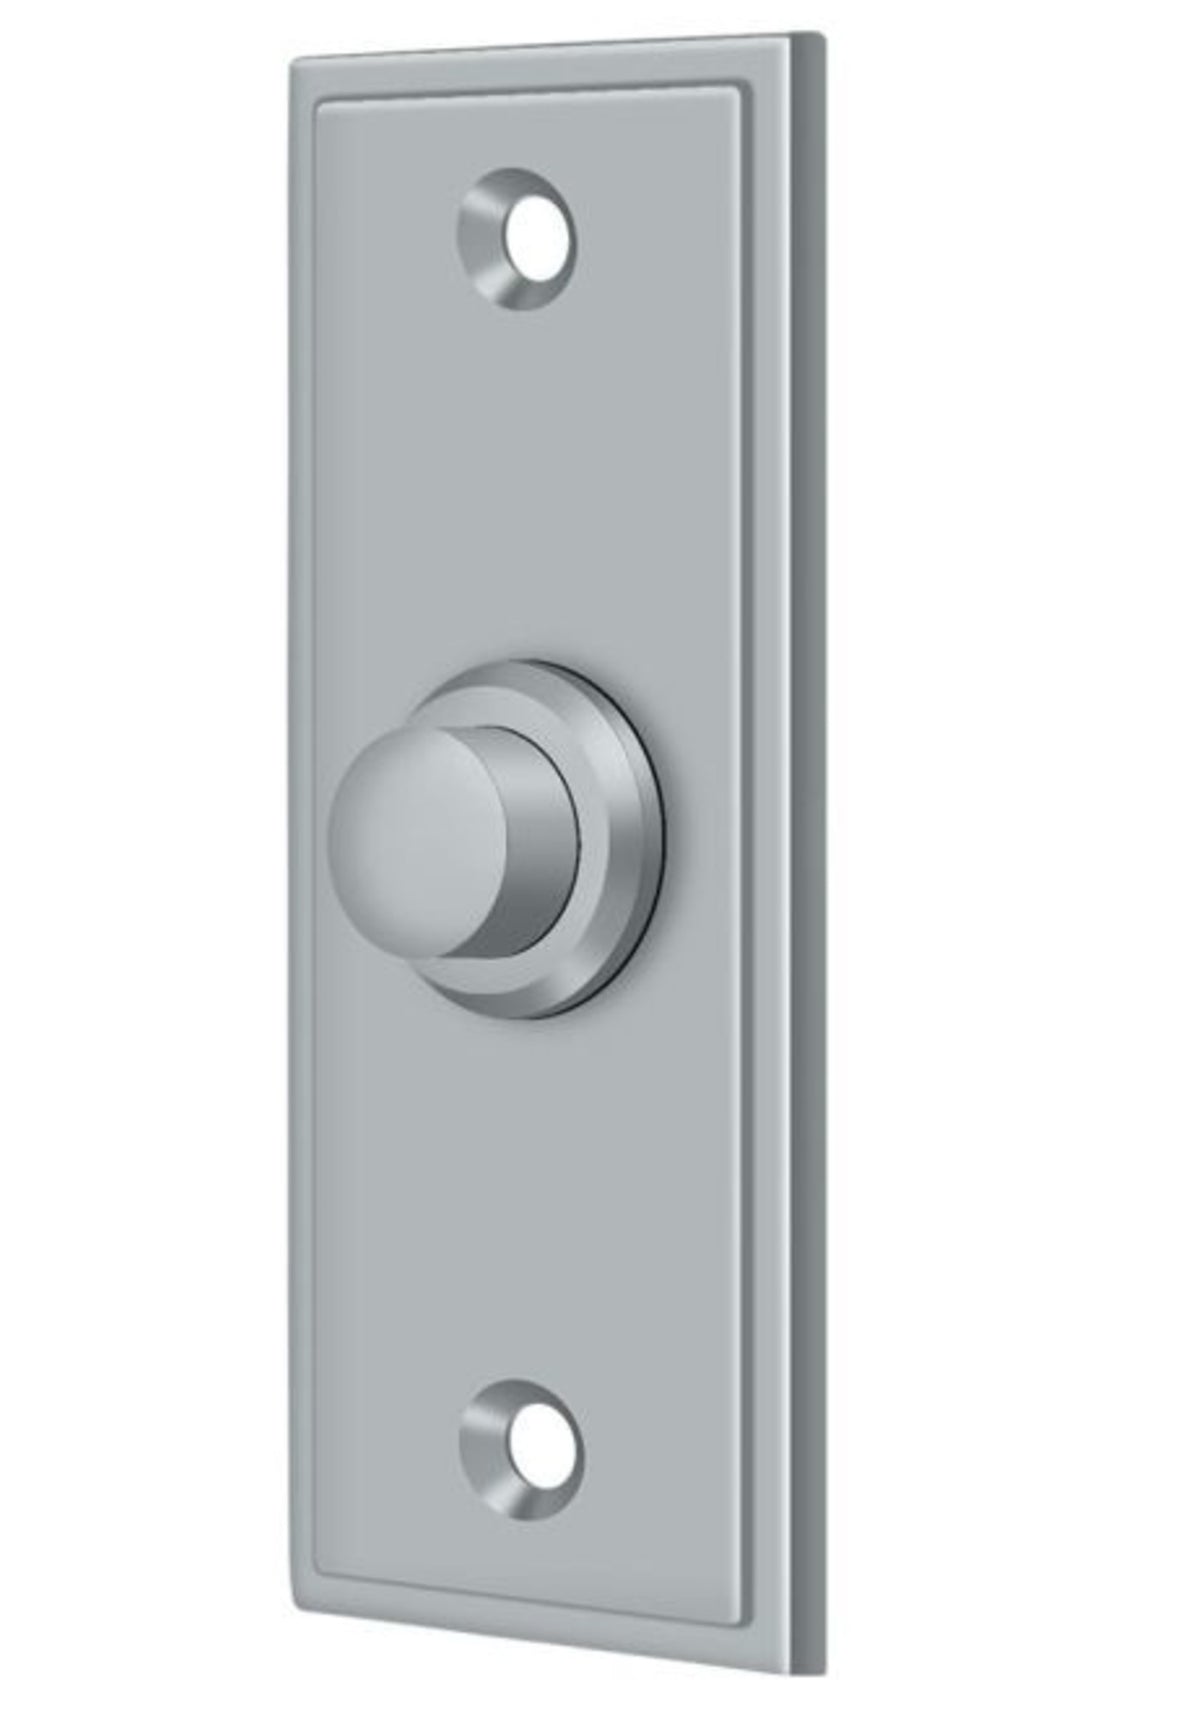 buy doorbell buttons at cheap rate in bulk. wholesale & retail professional electrical tools store. home décor ideas, maintenance, repair replacement parts